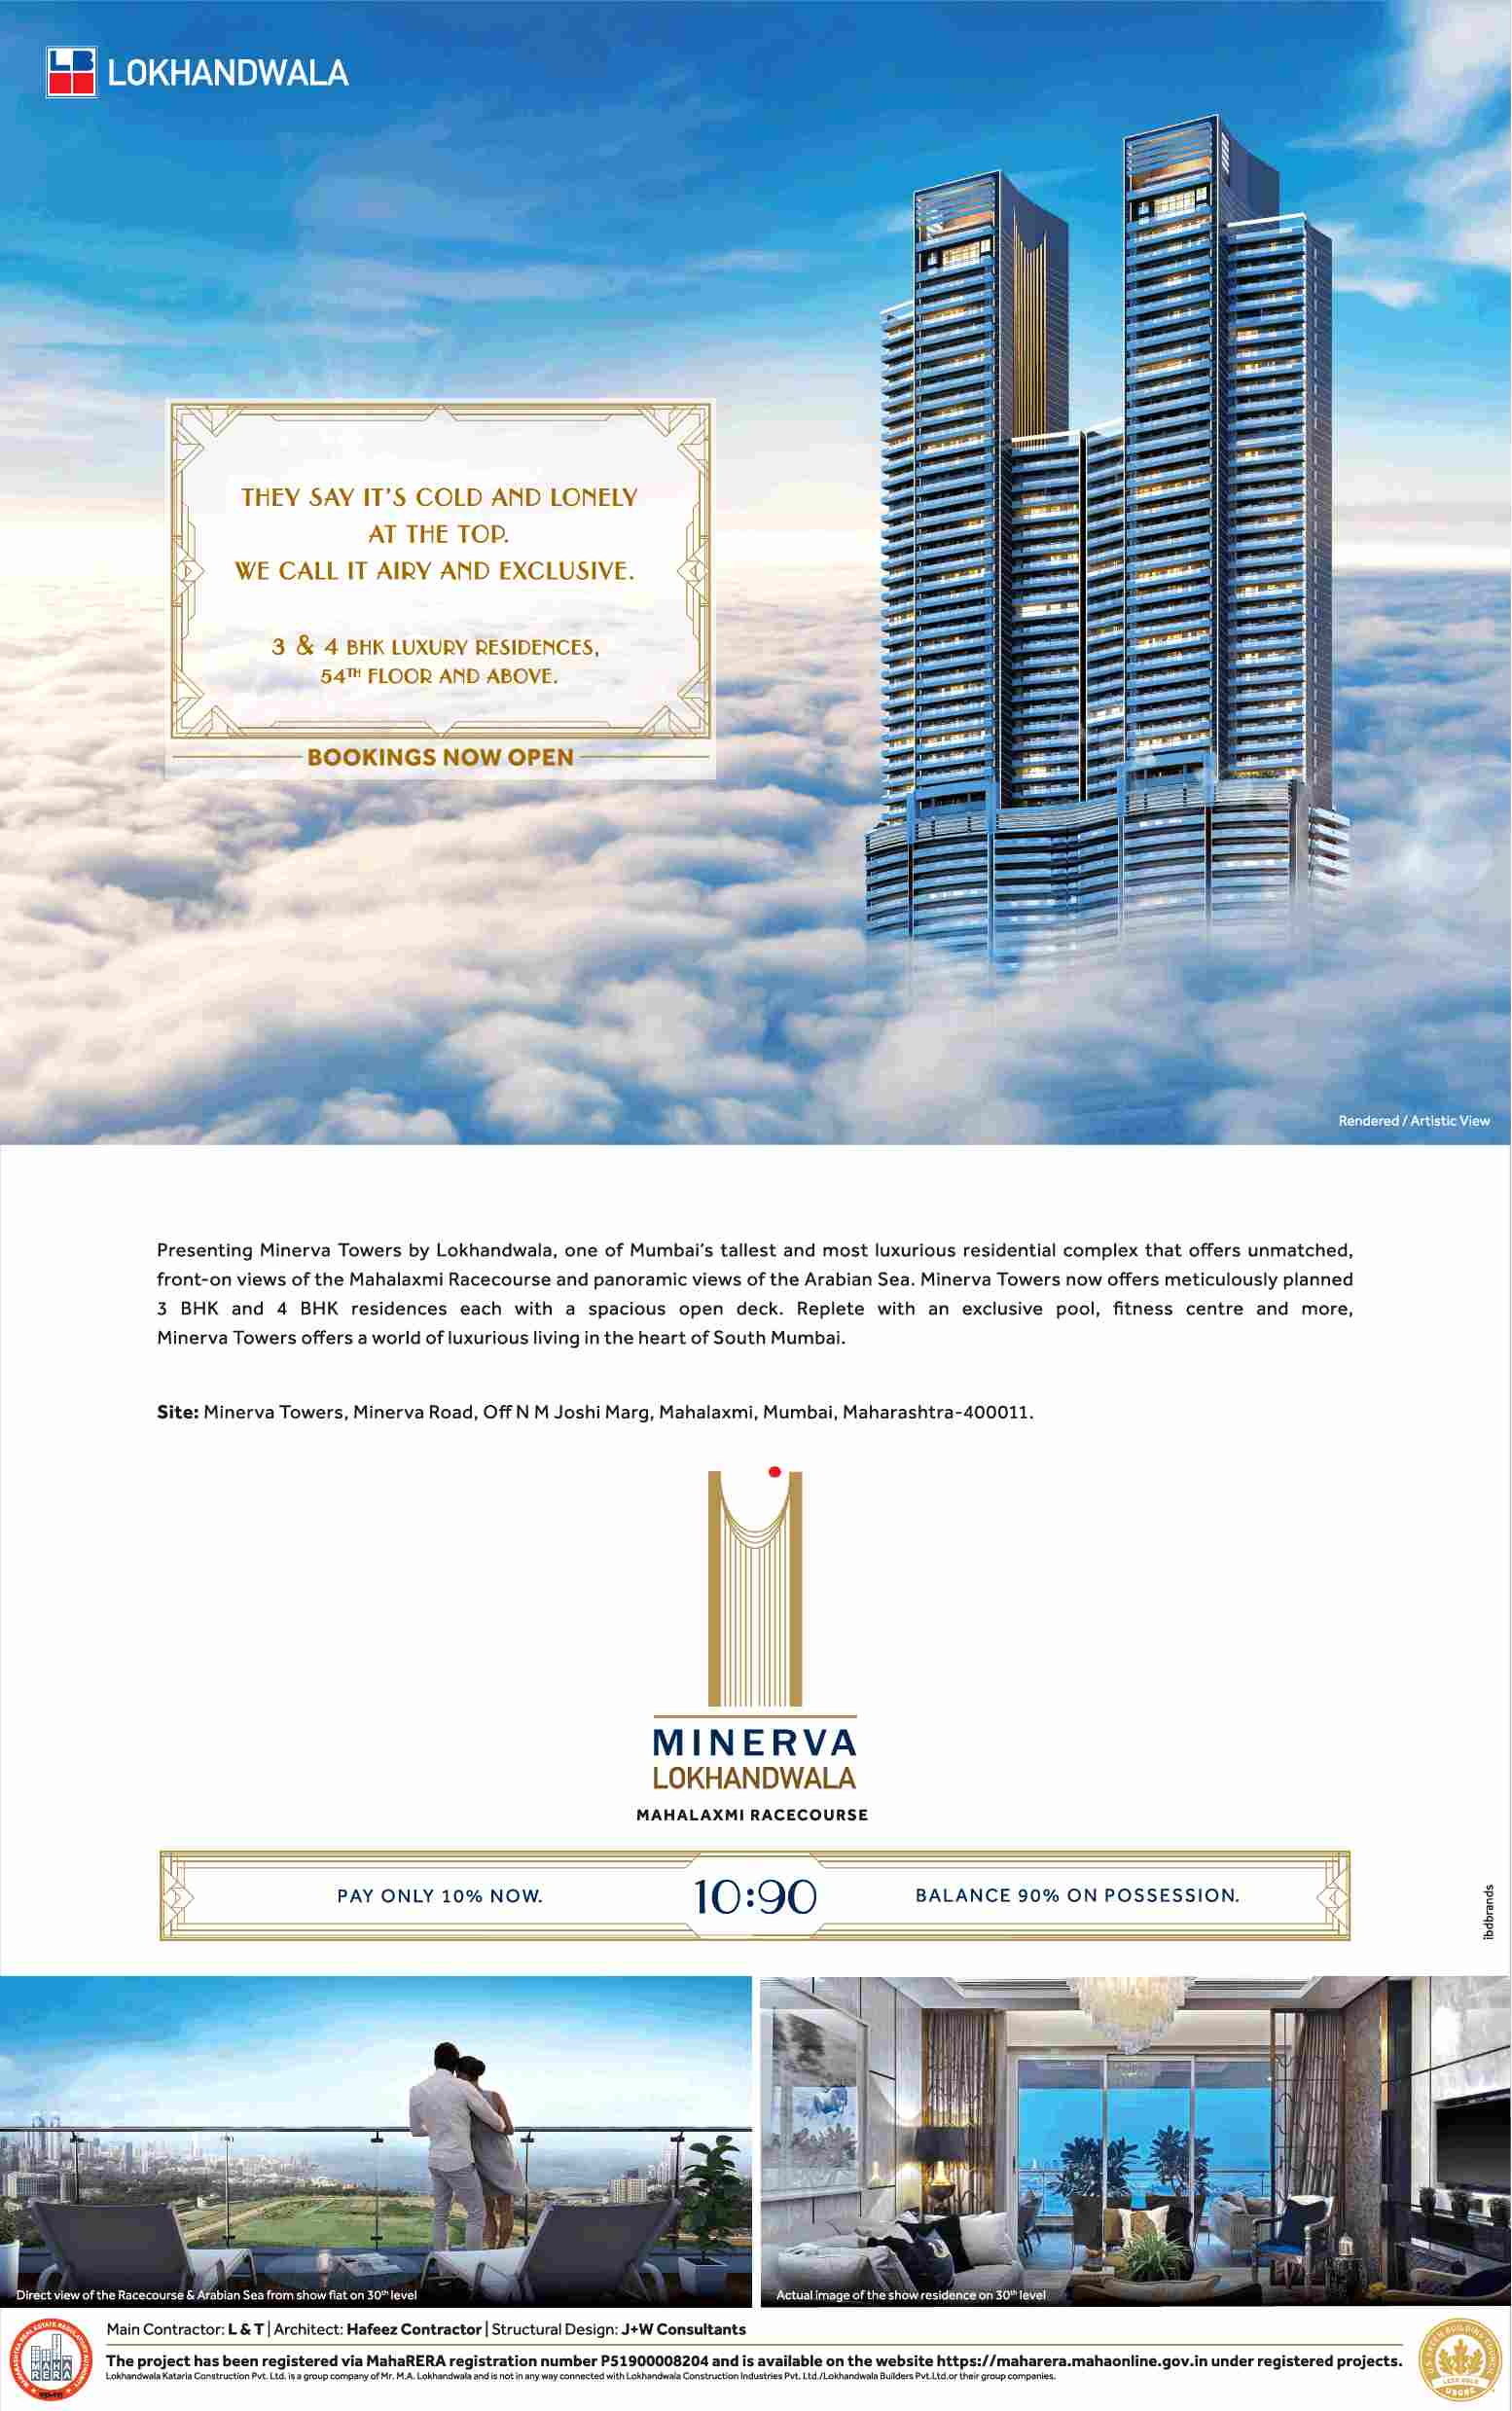 Pay only 10% now and book your home at Lokhandwala Minerva Towers in Mumbai